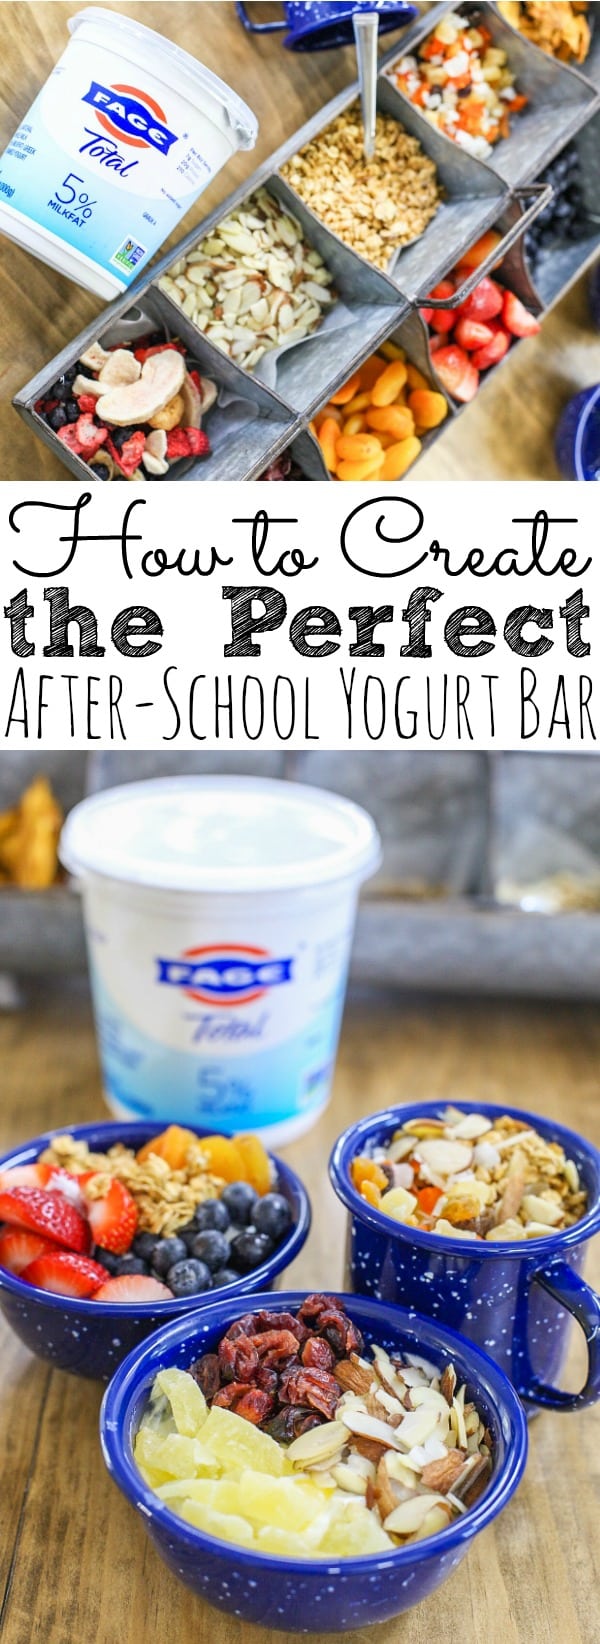 How To Create The Perfect After-School Yogurt Bar